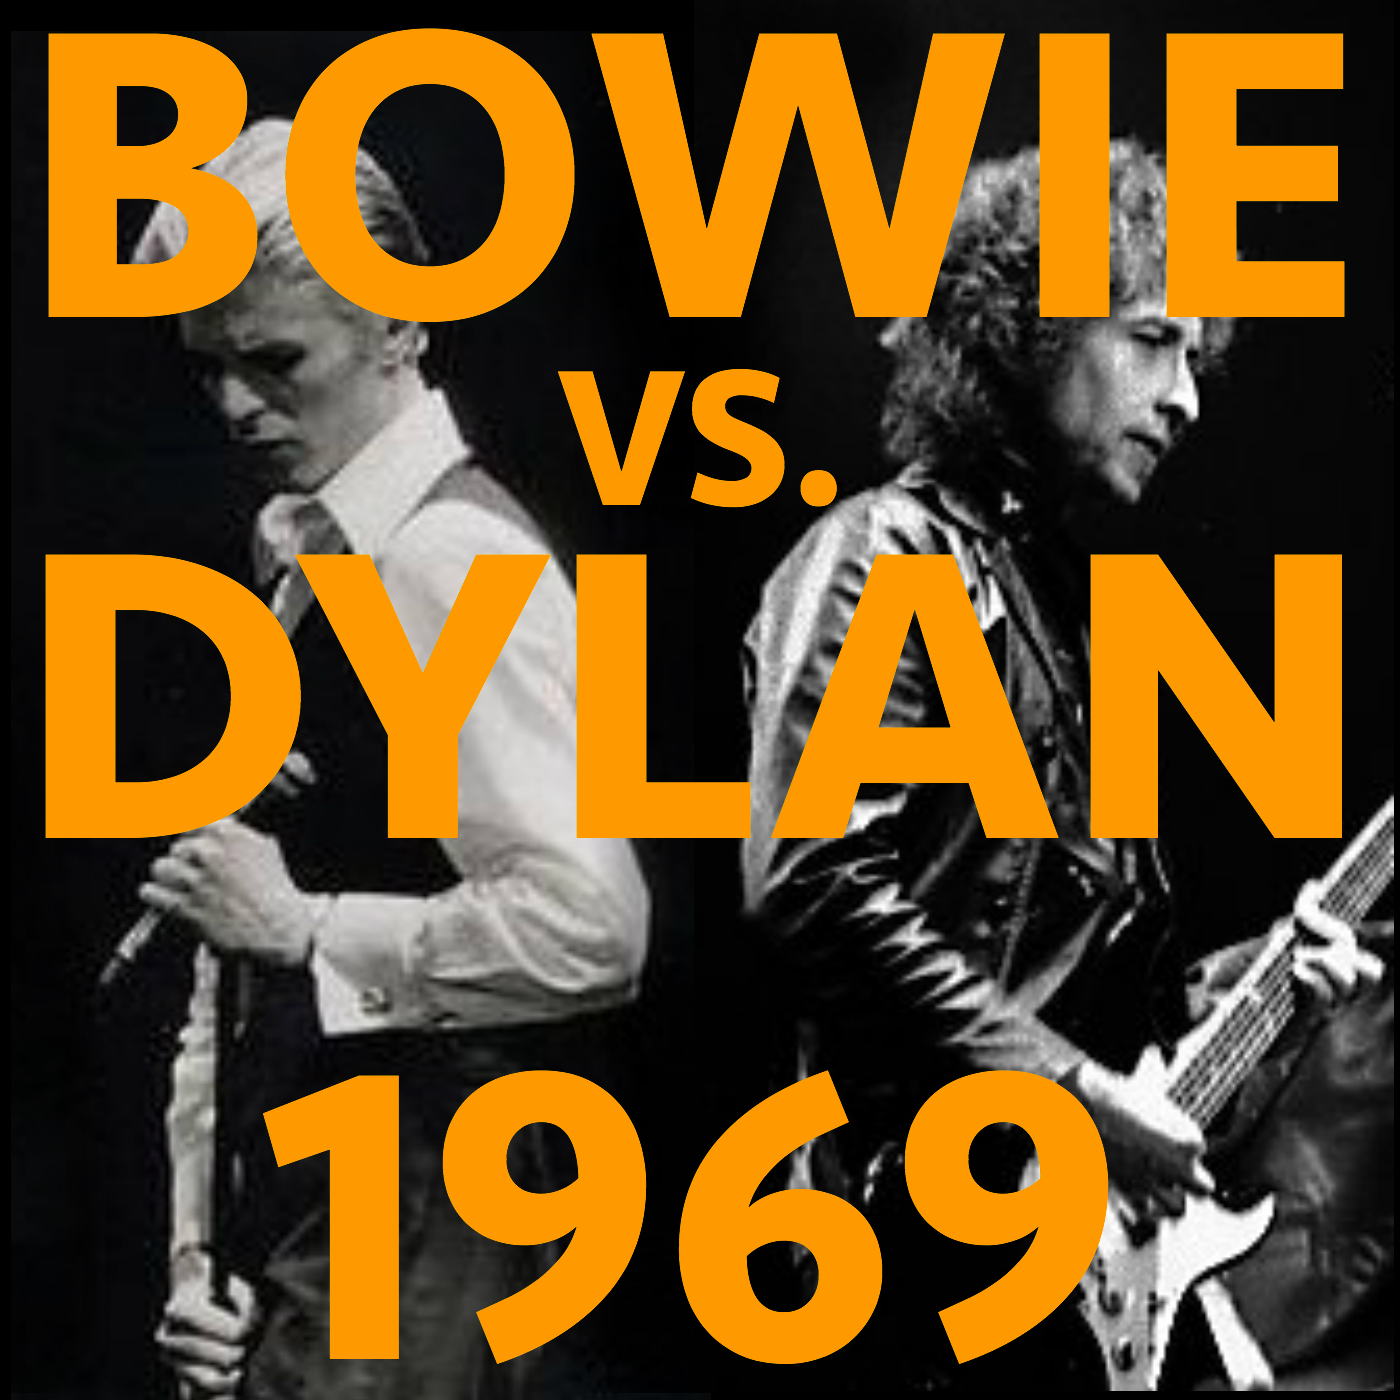 EP03: 1969 - David Bowie (ver. 2) vs. Nashville Skyline, or the Odd Space Crooning of 1969